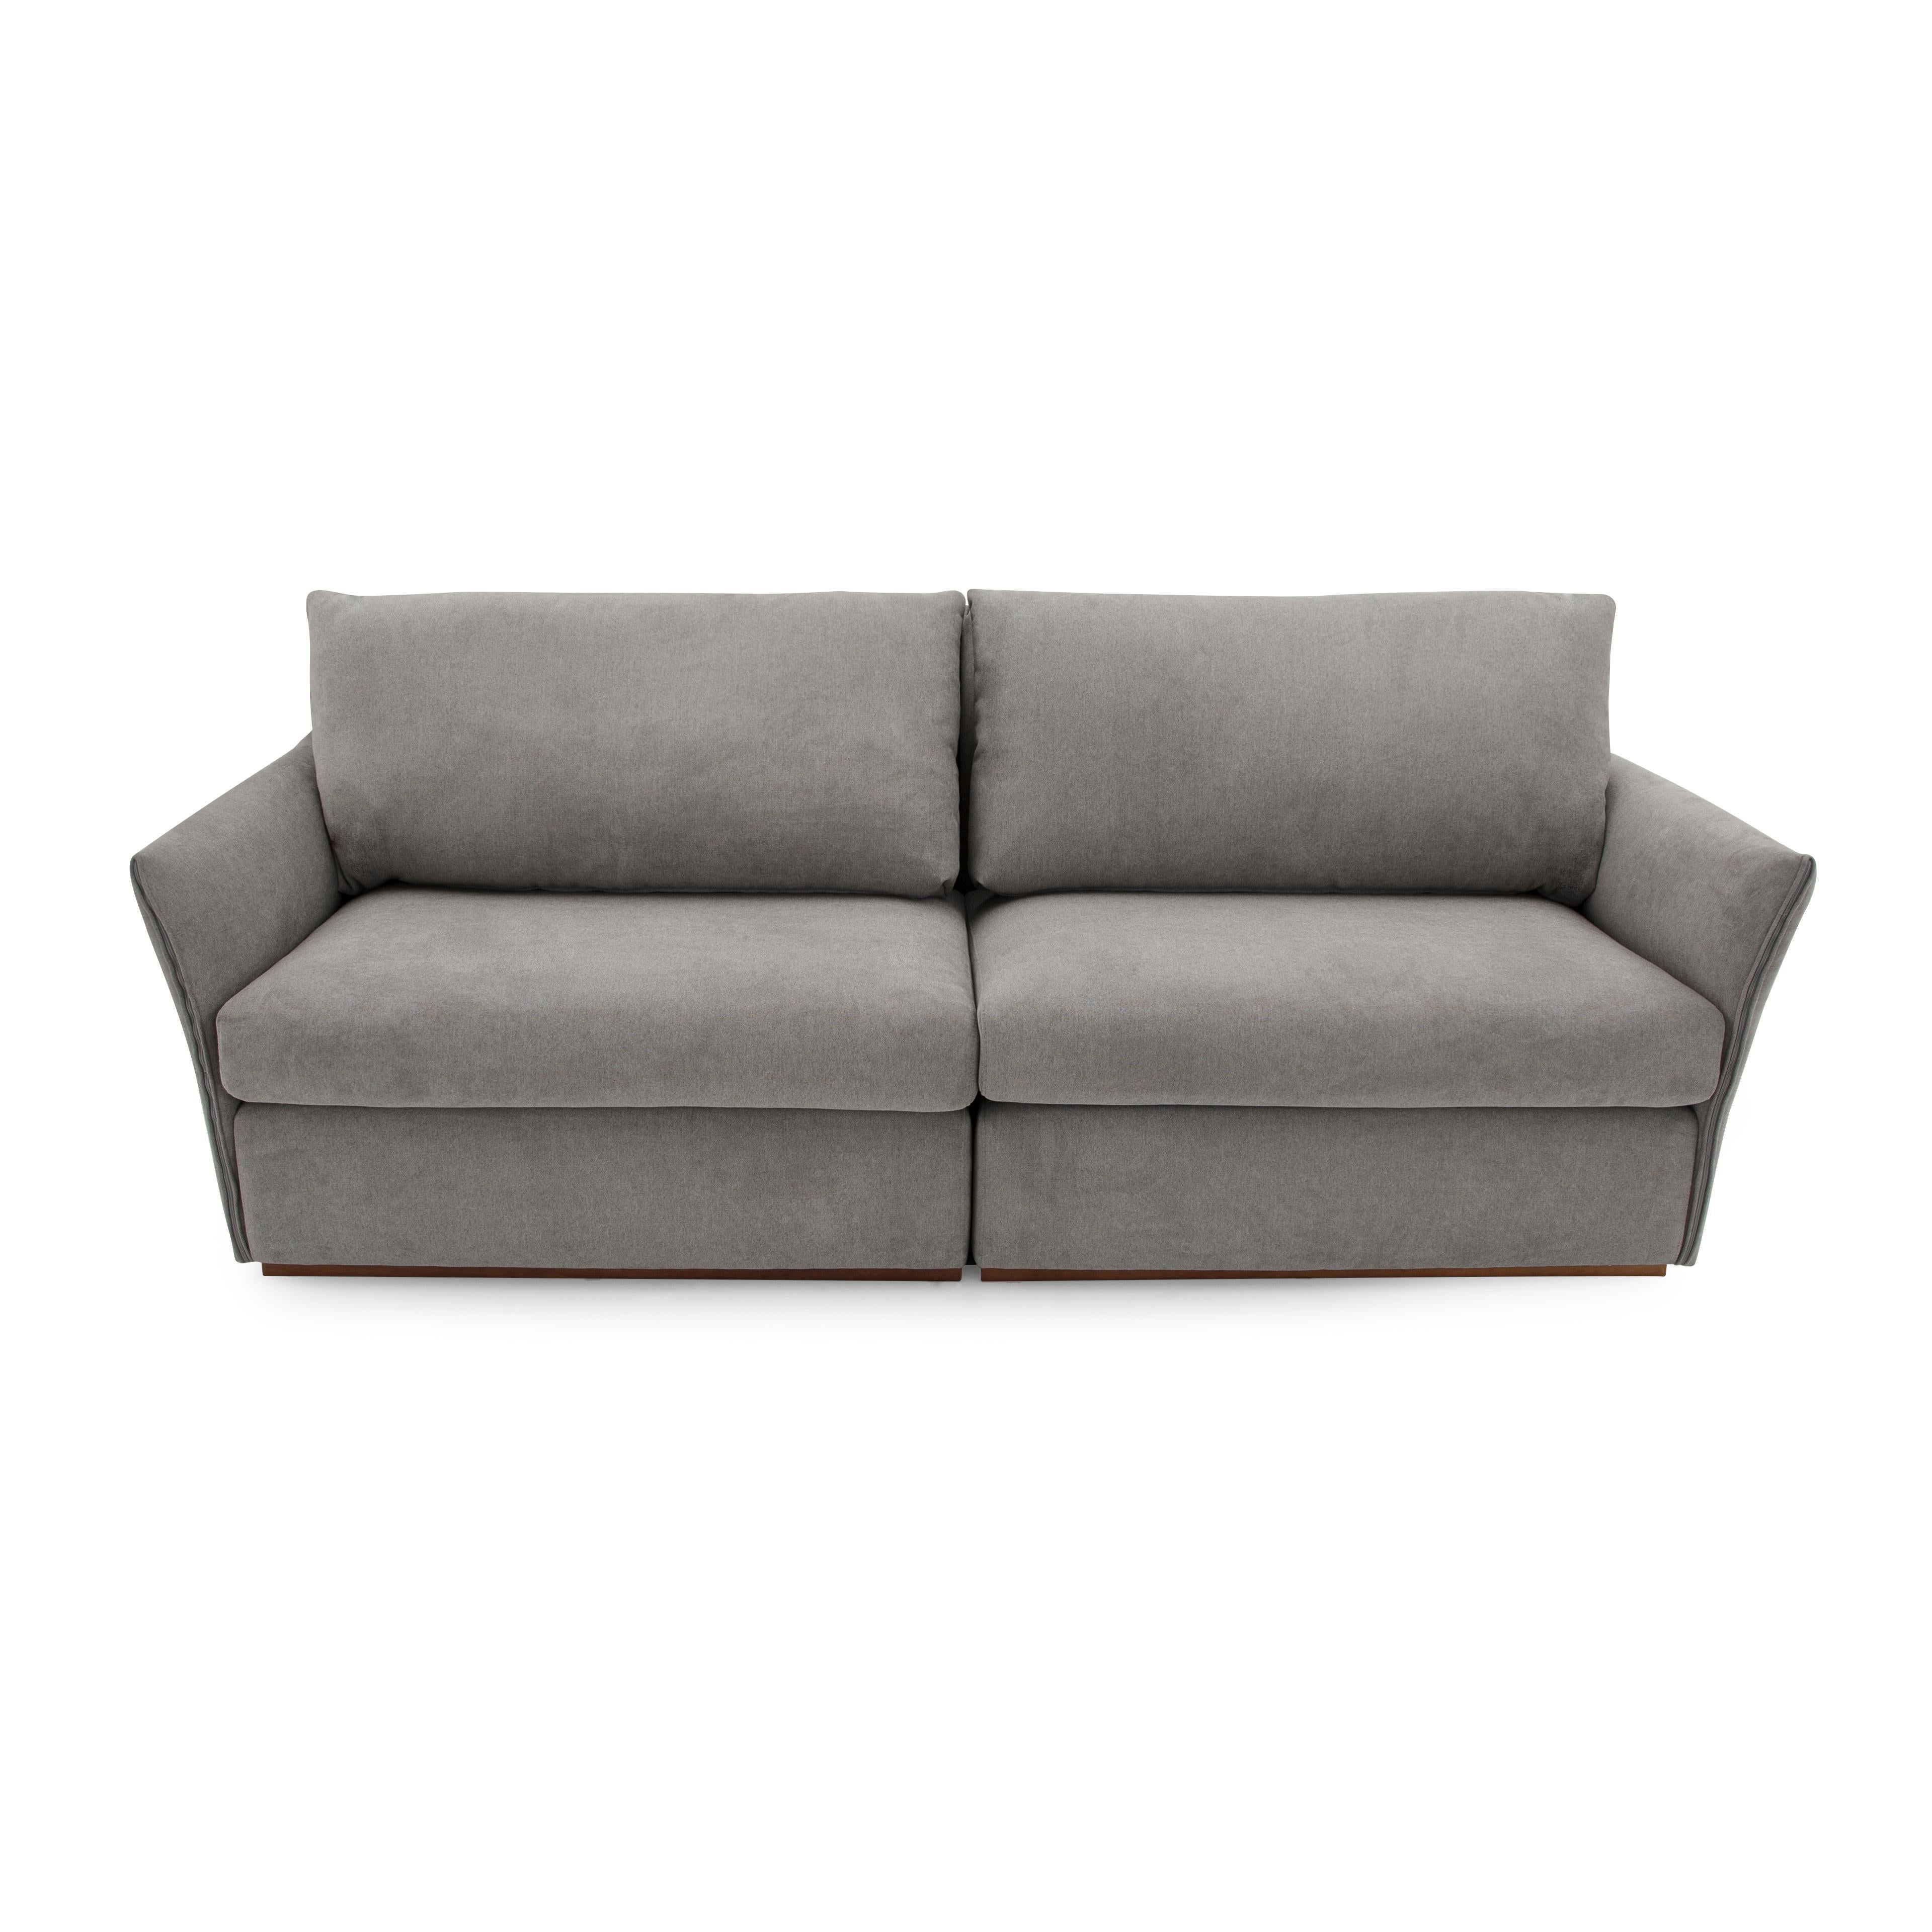 Contemporary Thin Sofa with Bowed Arms in an Upholstered Gray Fabric For Sale